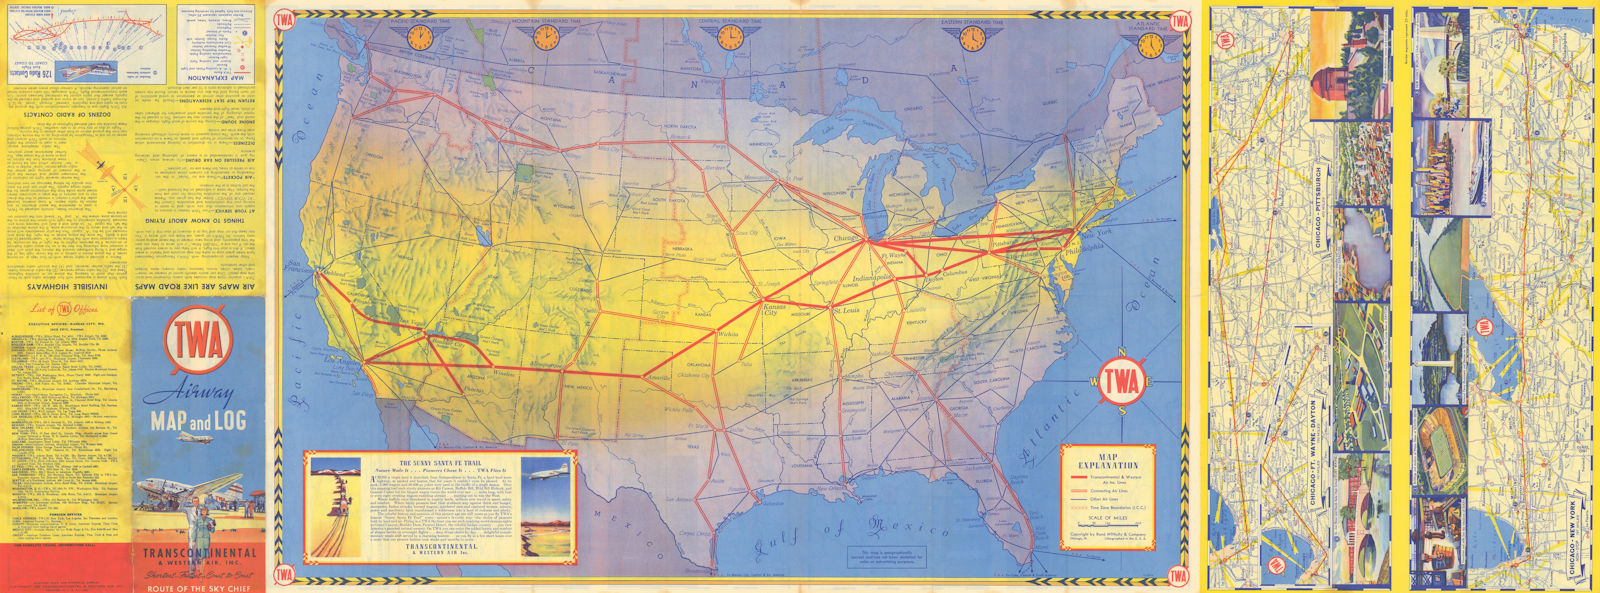 Associate Product TWA Airway Transcontinental & Western Air Airline network route map 18"x48" 1939